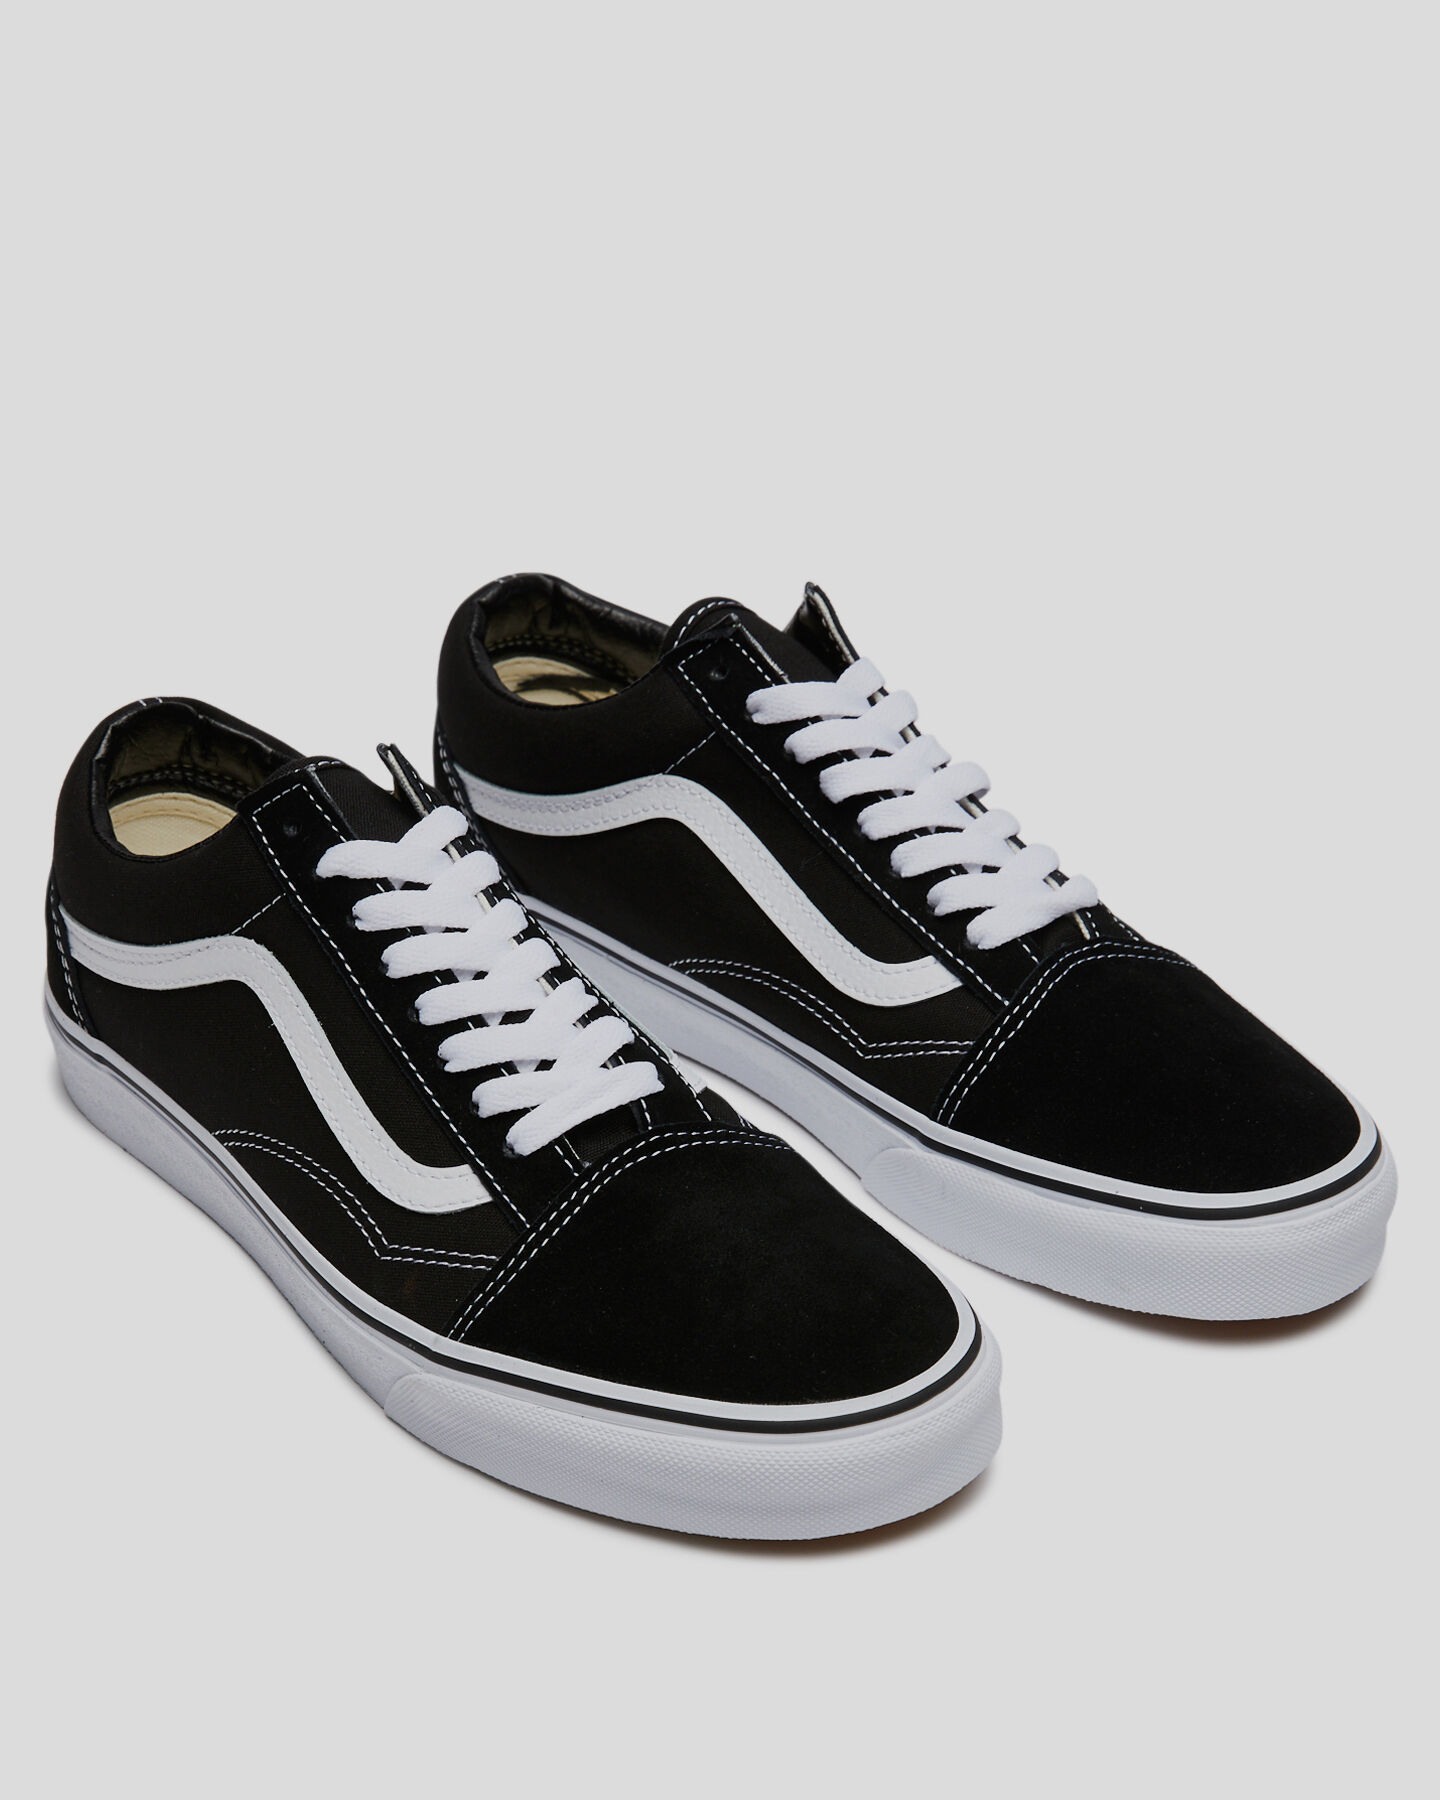 where to buy cheap vans shoes